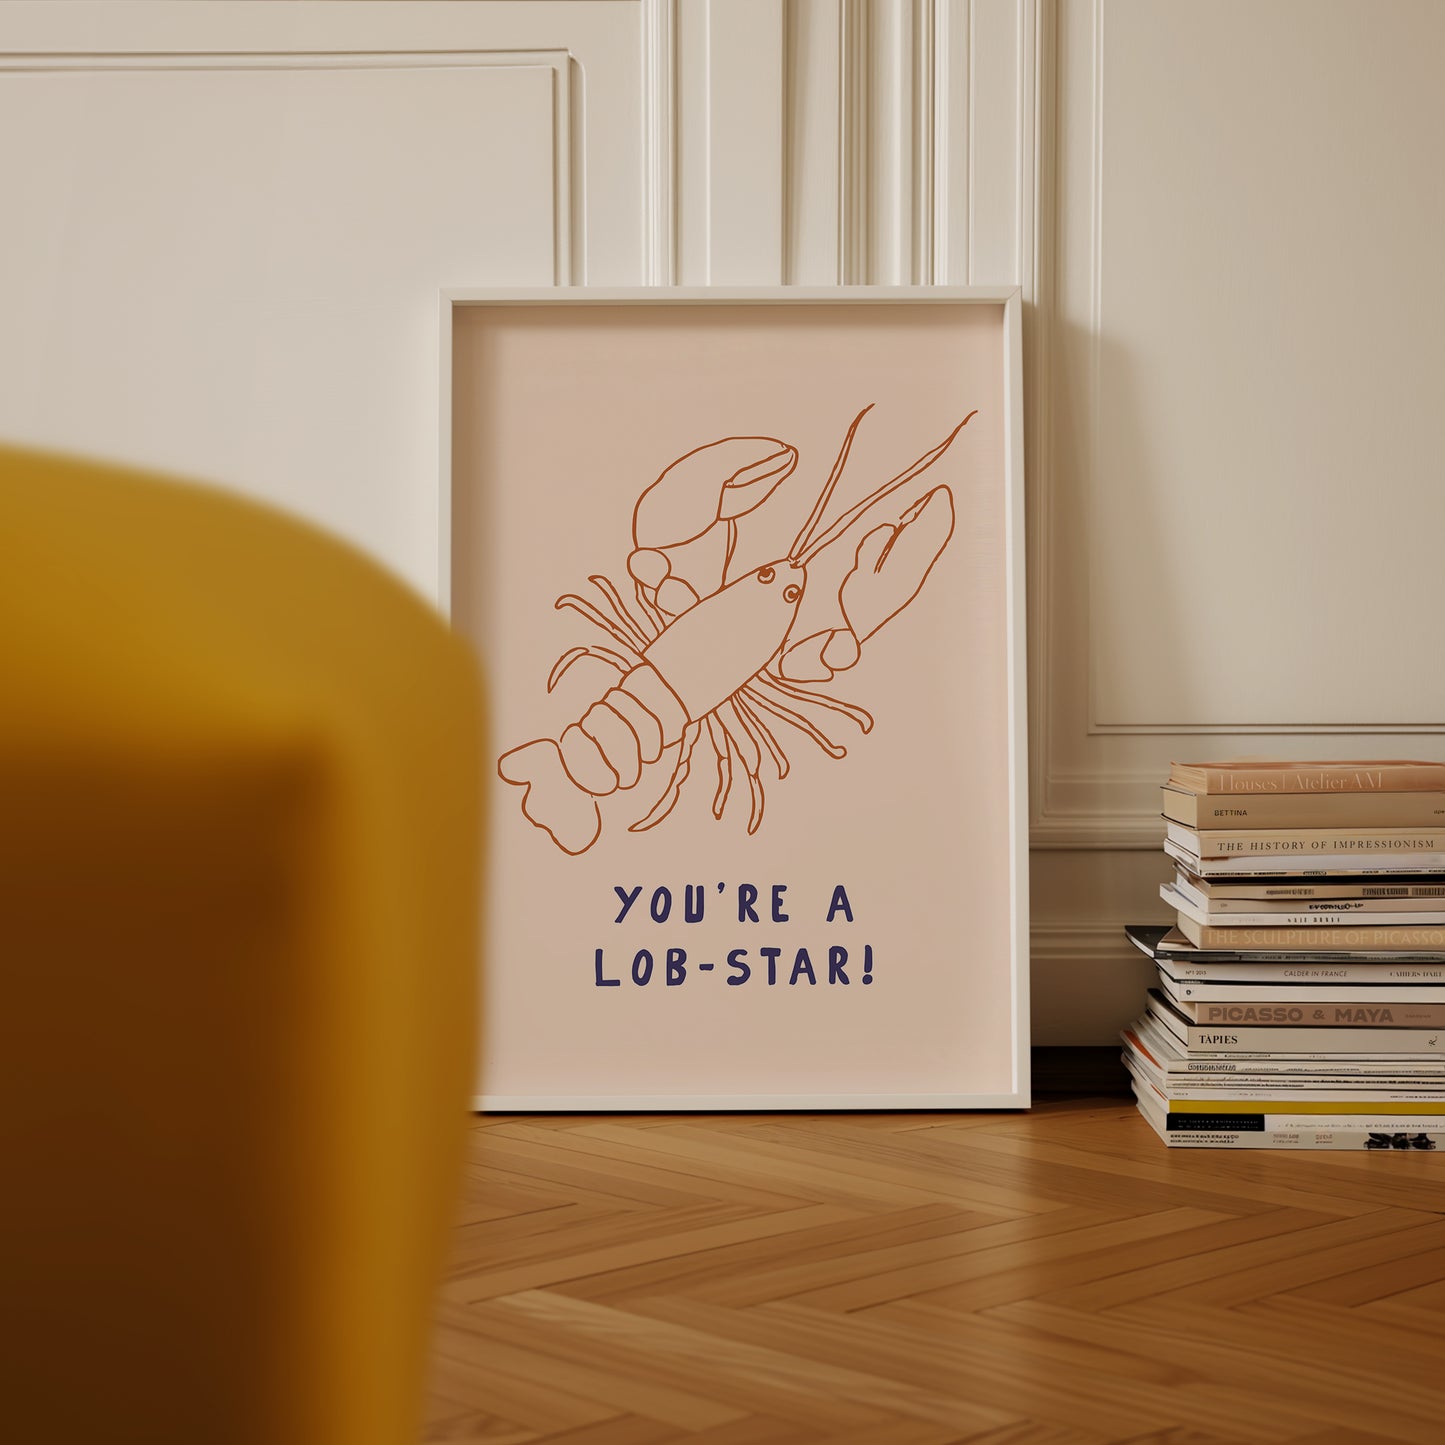 a picture of a lobster on a table next to a stack of books